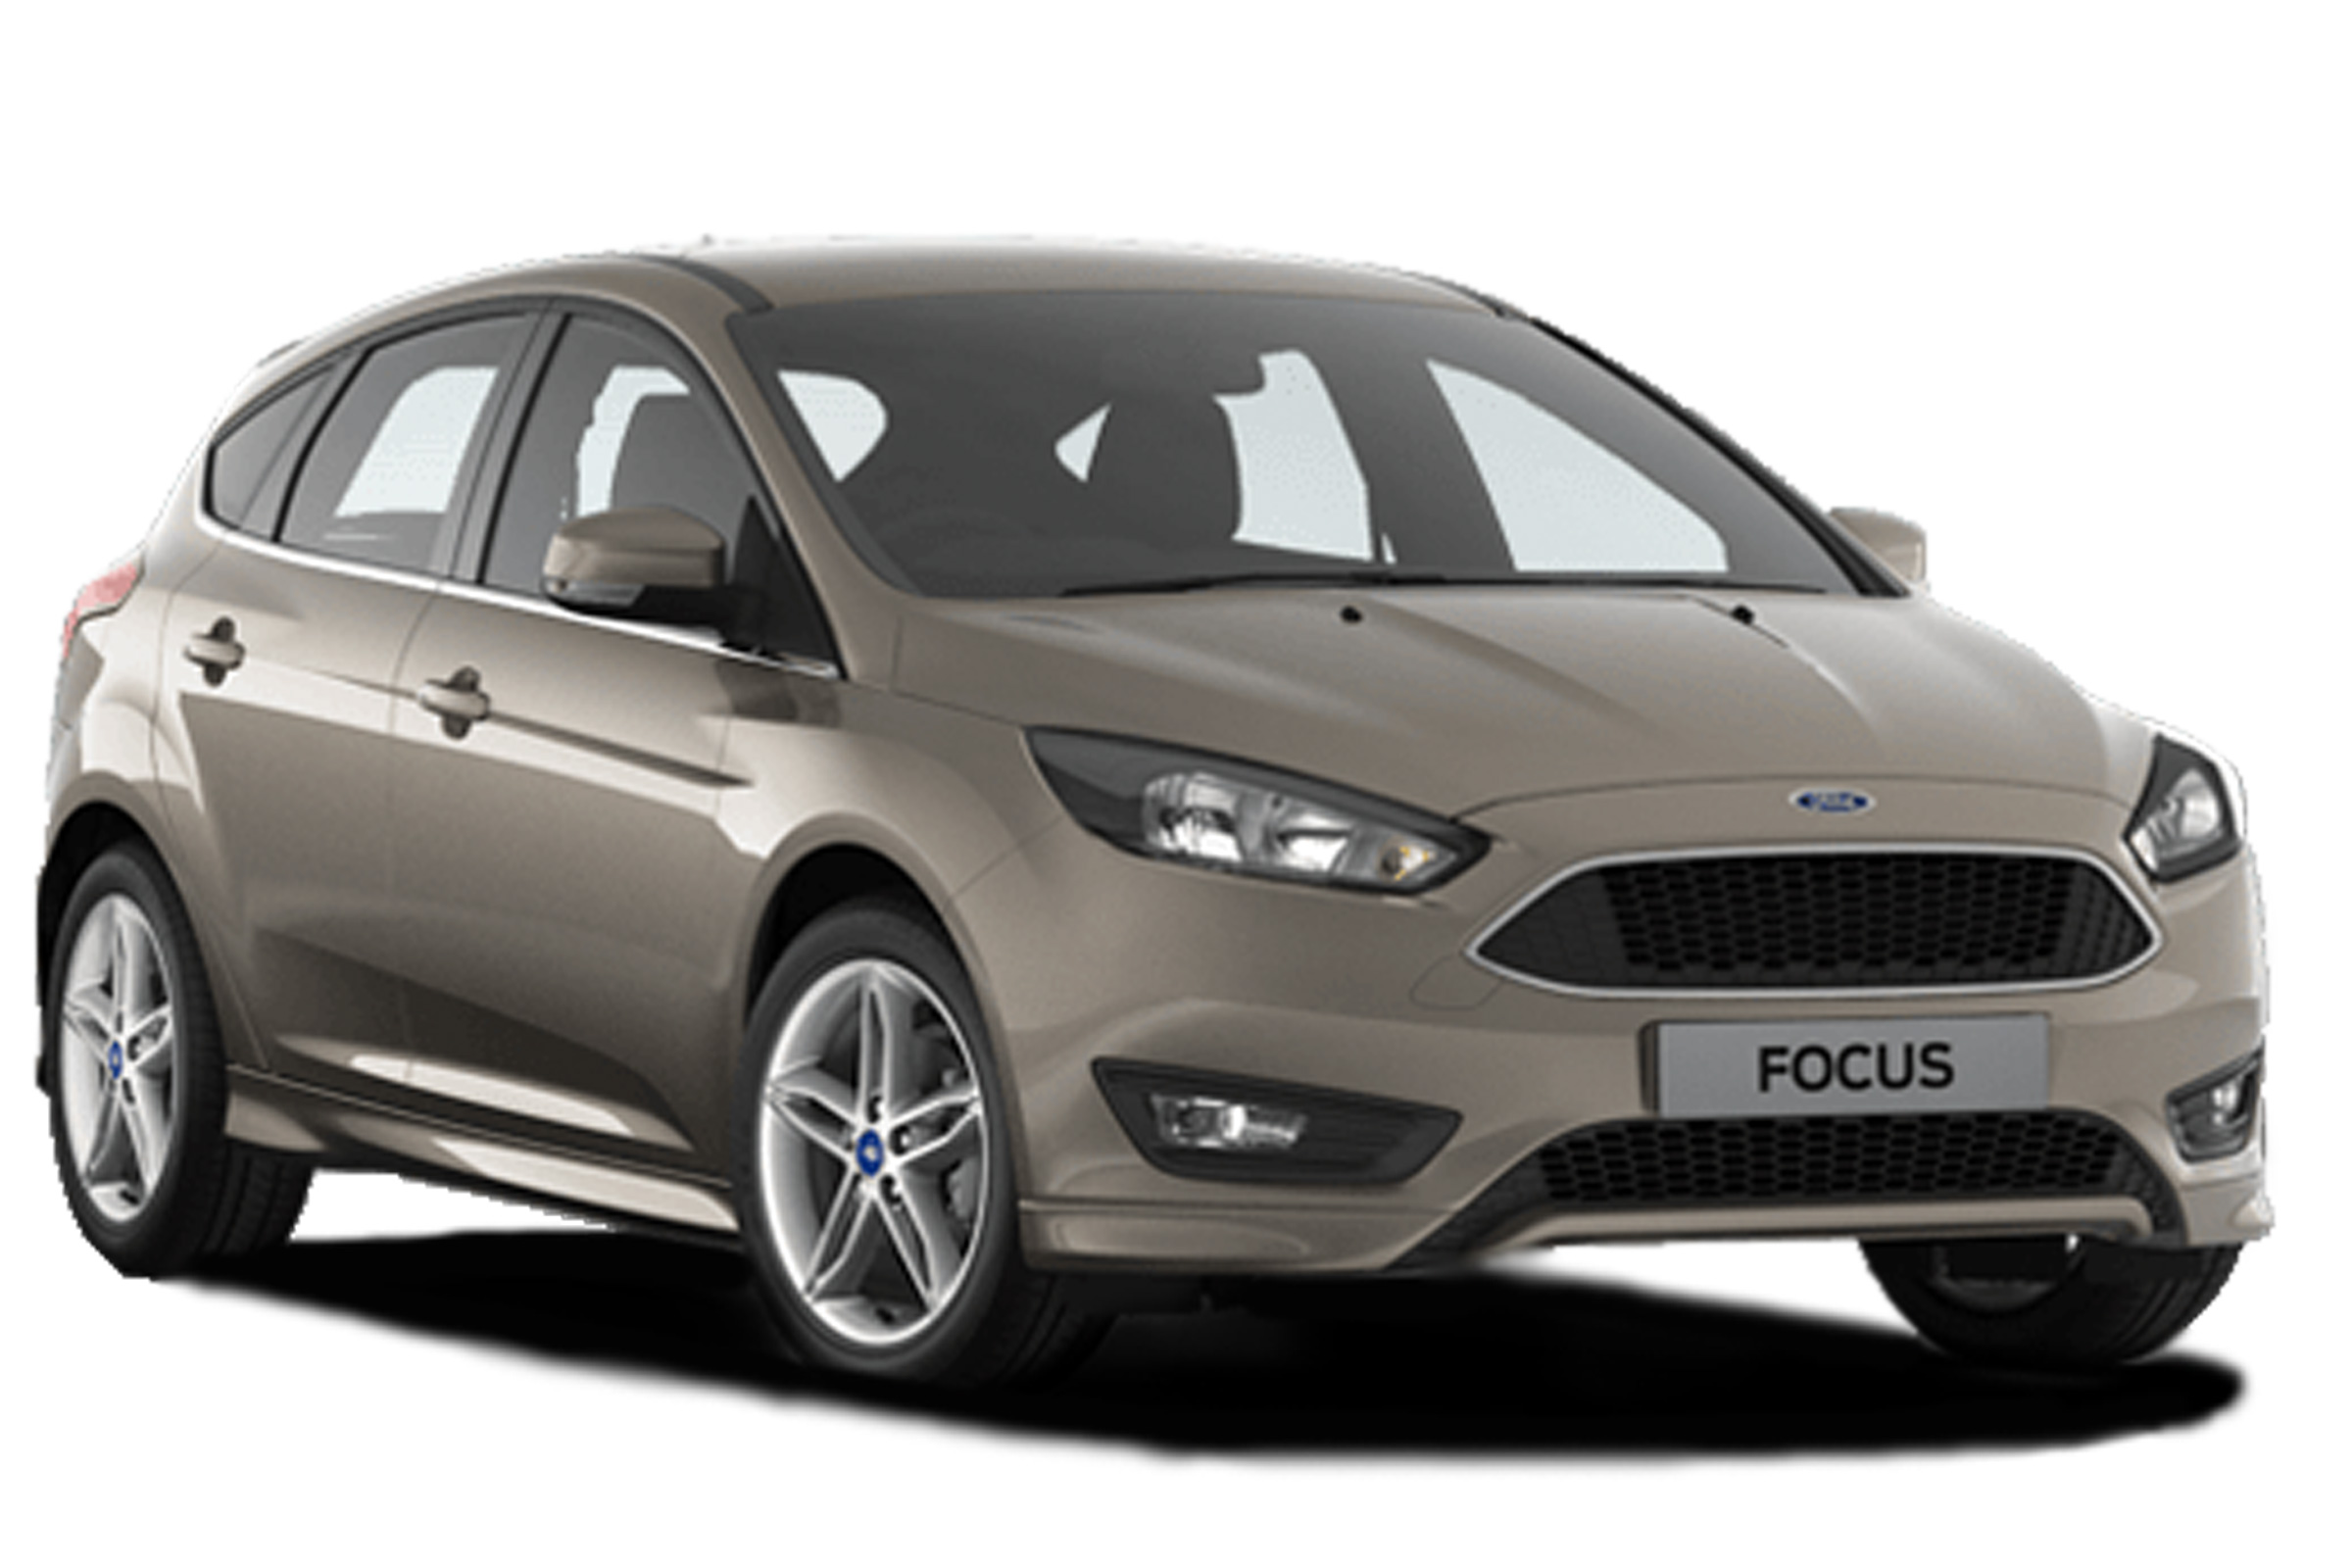 2015 Ford Focus S Standard Equipment  Available Options  YouTube